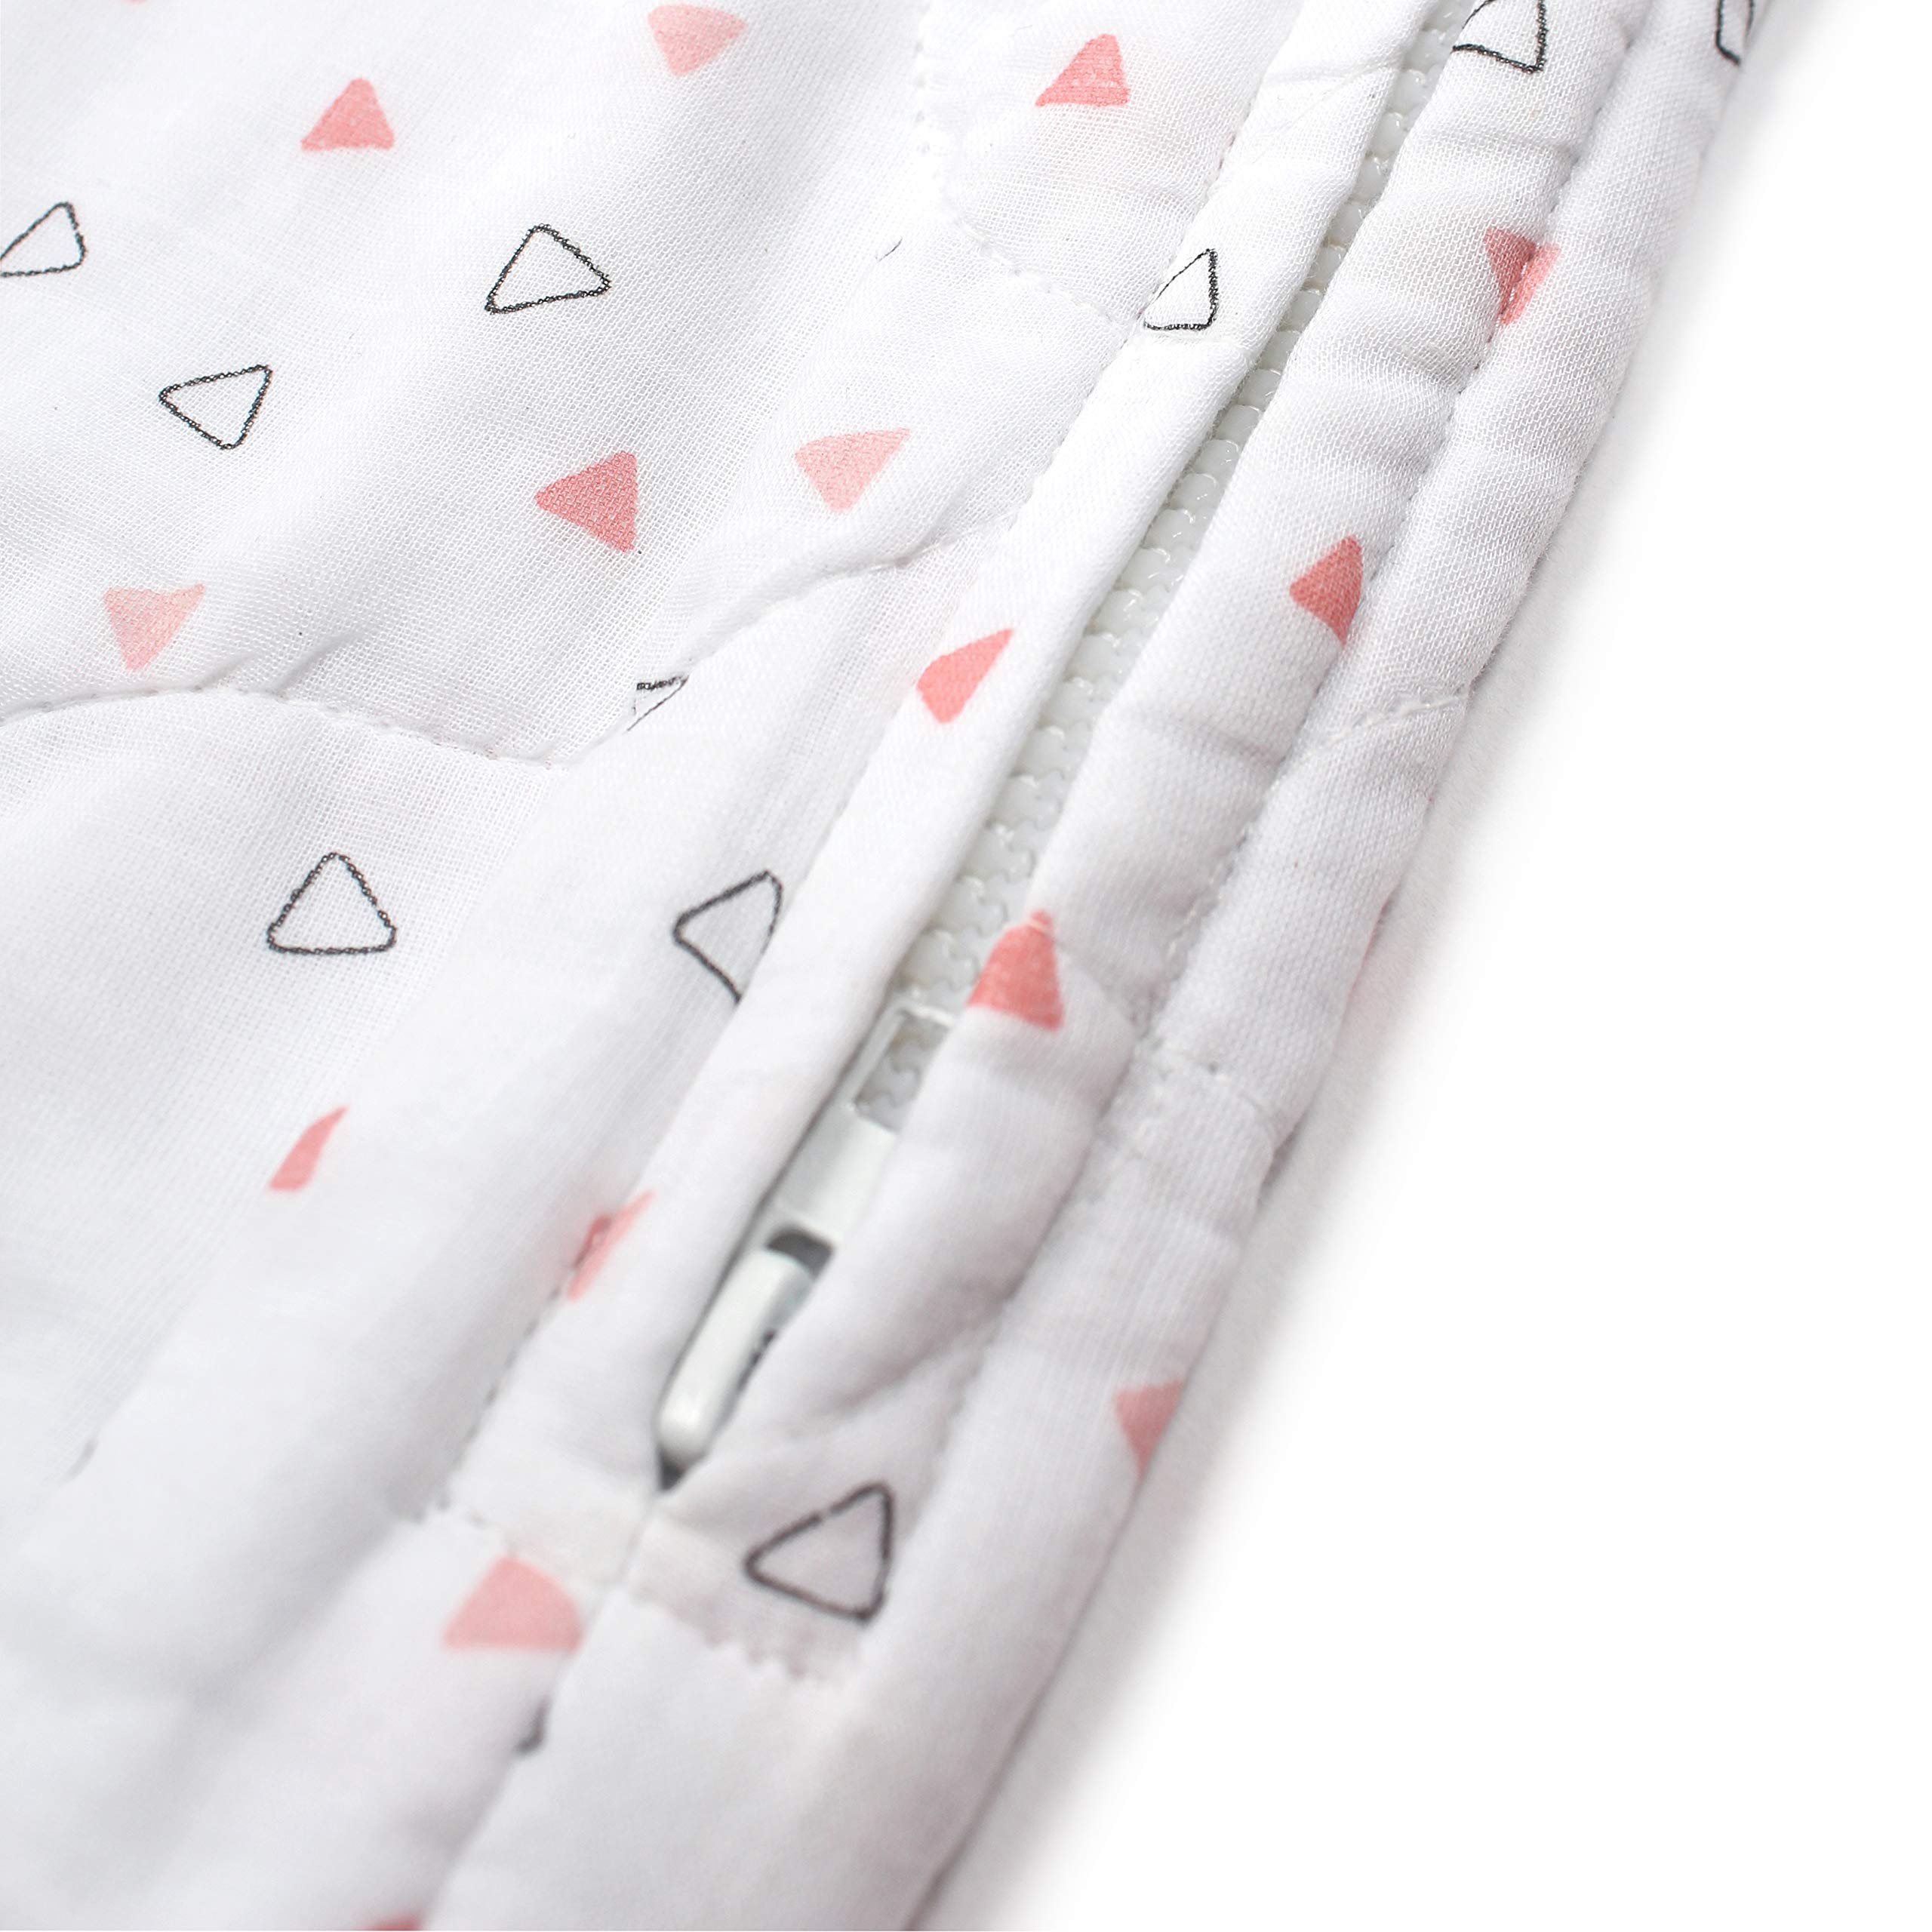 The White Cradle Baby Sleeping Bag for Infants & Newborns (Boys) - Pink Hearts & Triangles